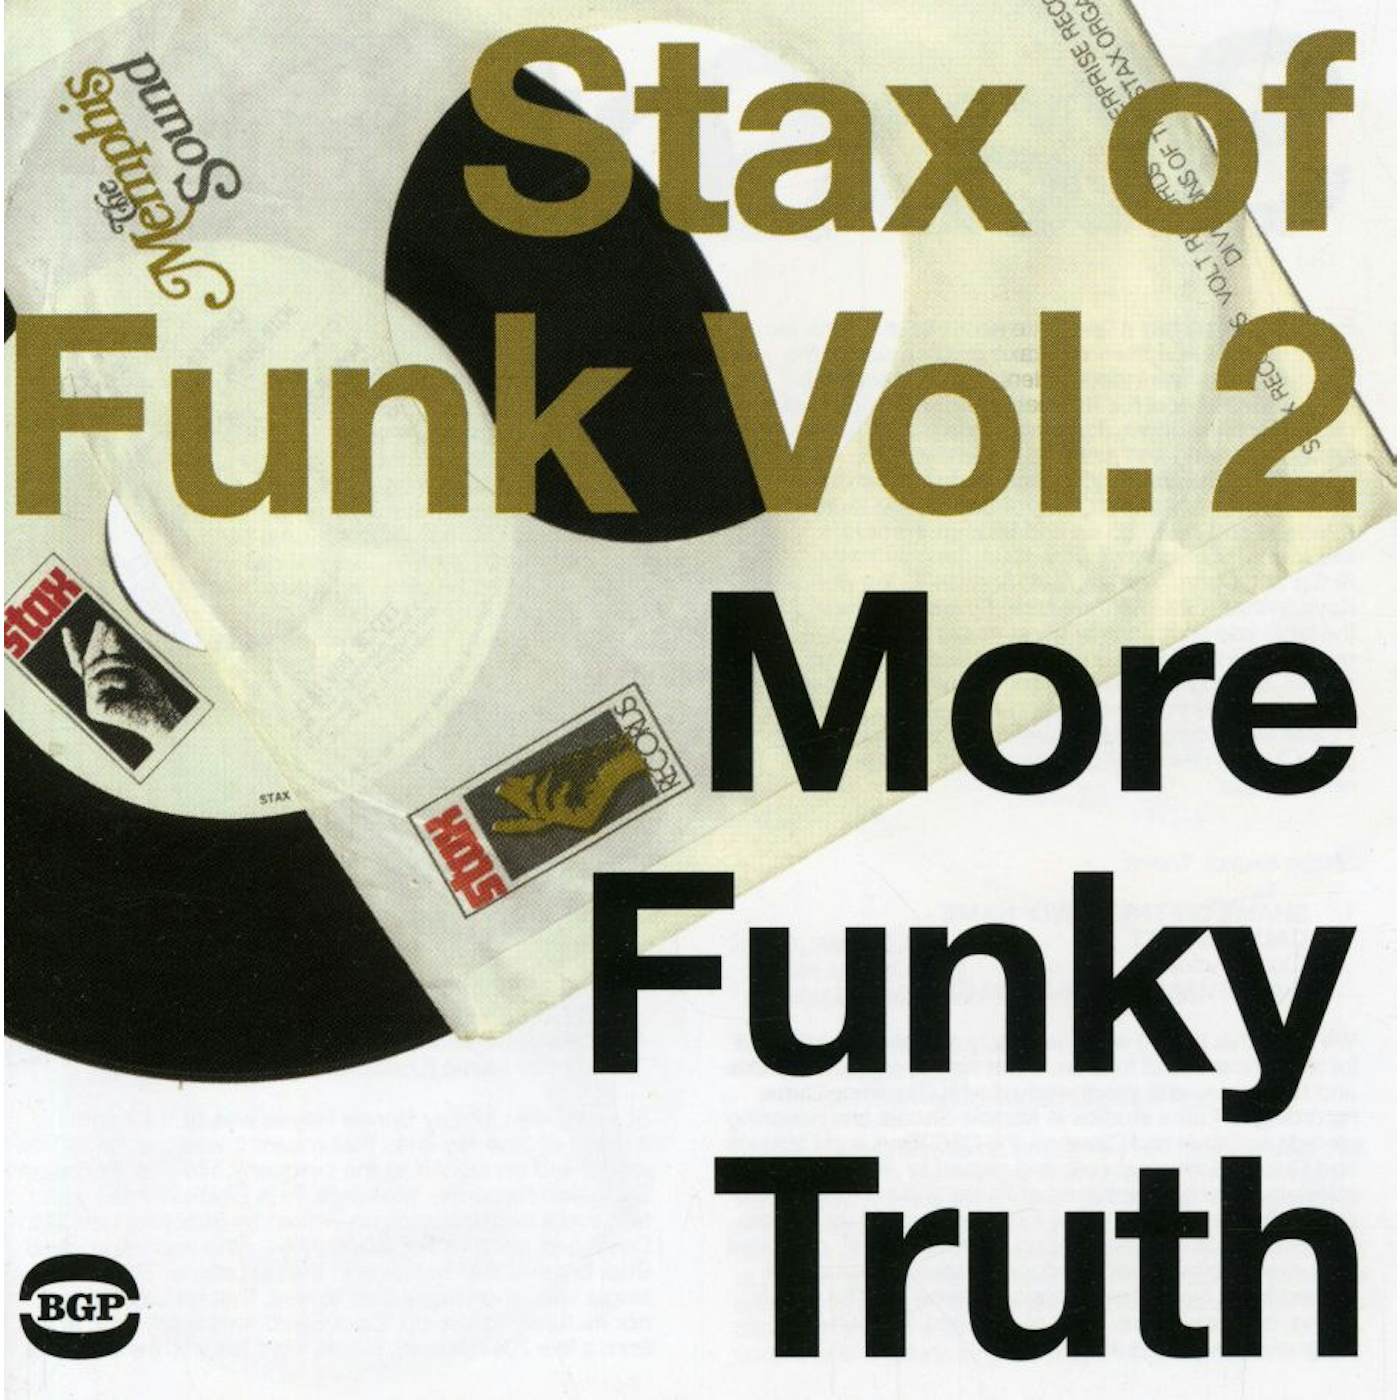 STAX OF FUNK 2: MORE FUNKY TRUTH / VARIOUS CD